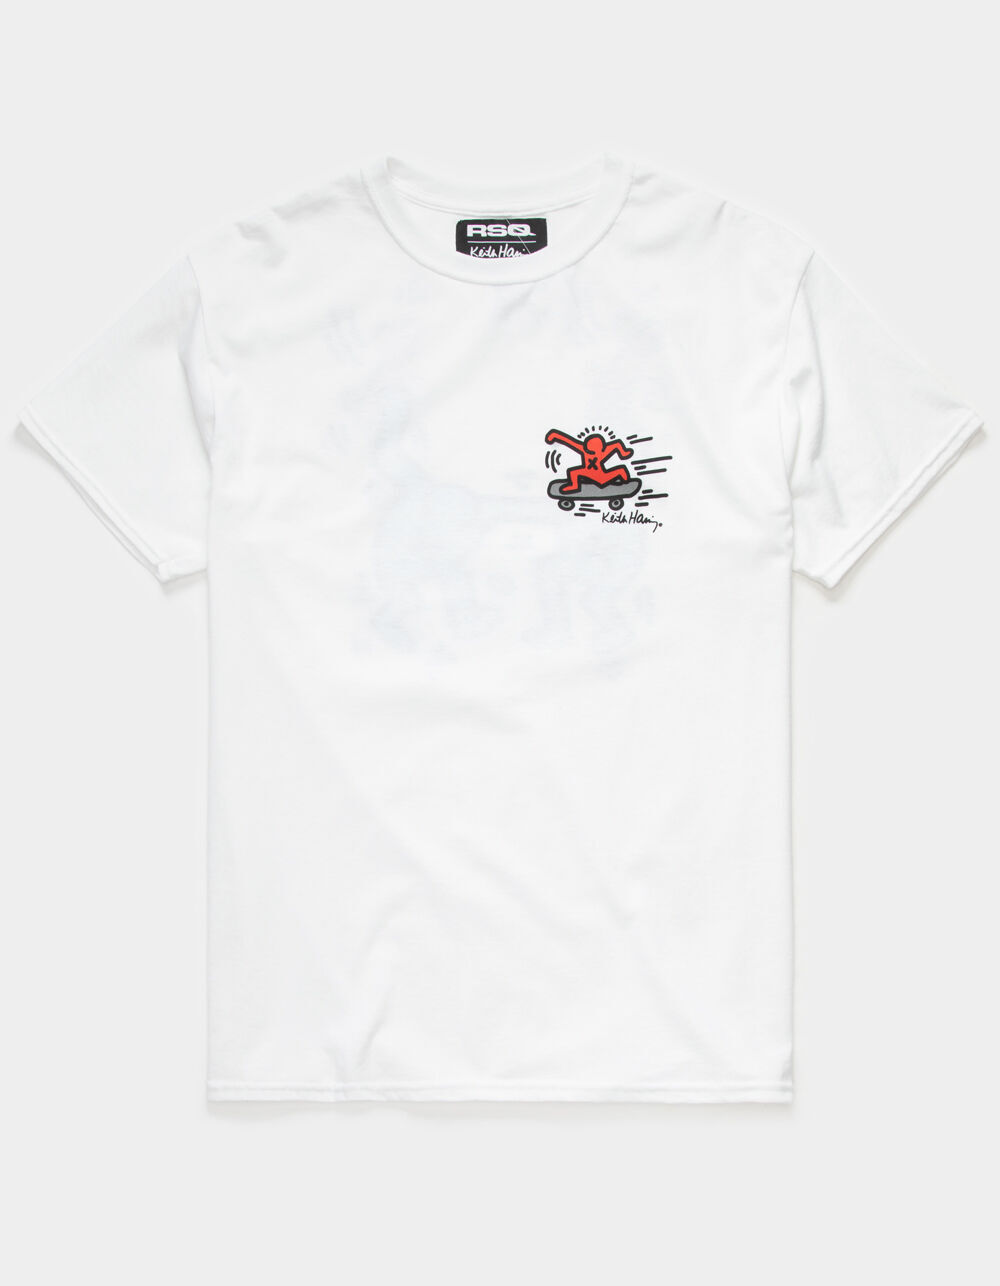 RSQ x Keith Haring Mens T-Shirt - WHITE | Tillys